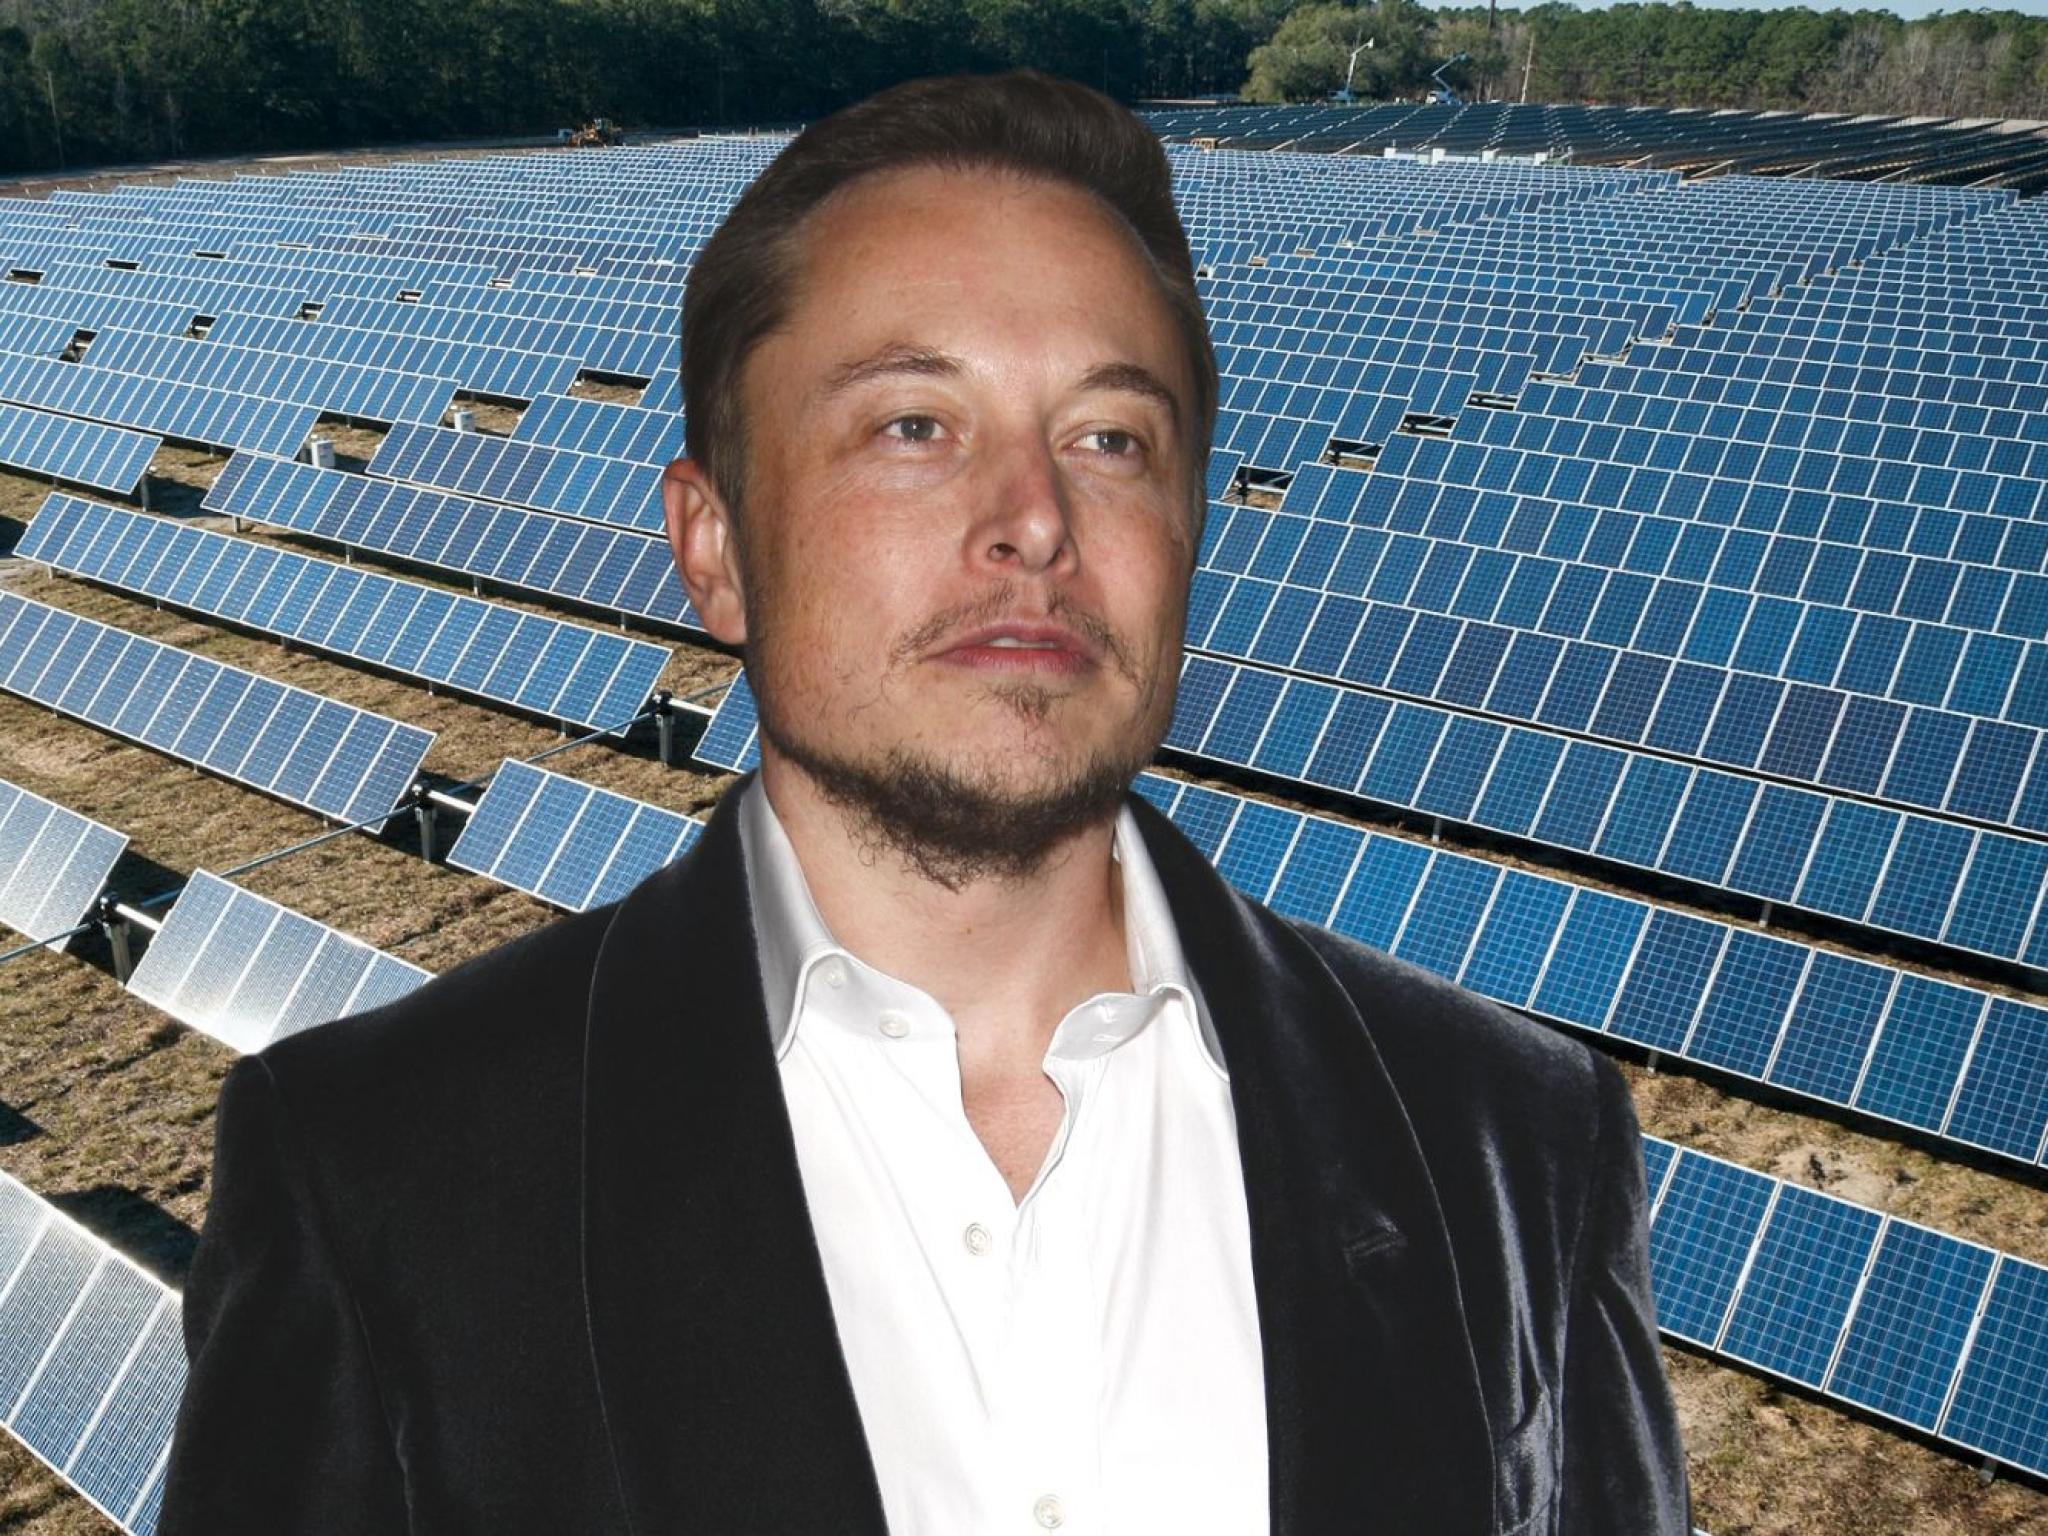  elon-musk-says-this-energy-source-can-power-a-civilization-over-100-times-larger-than-ours 